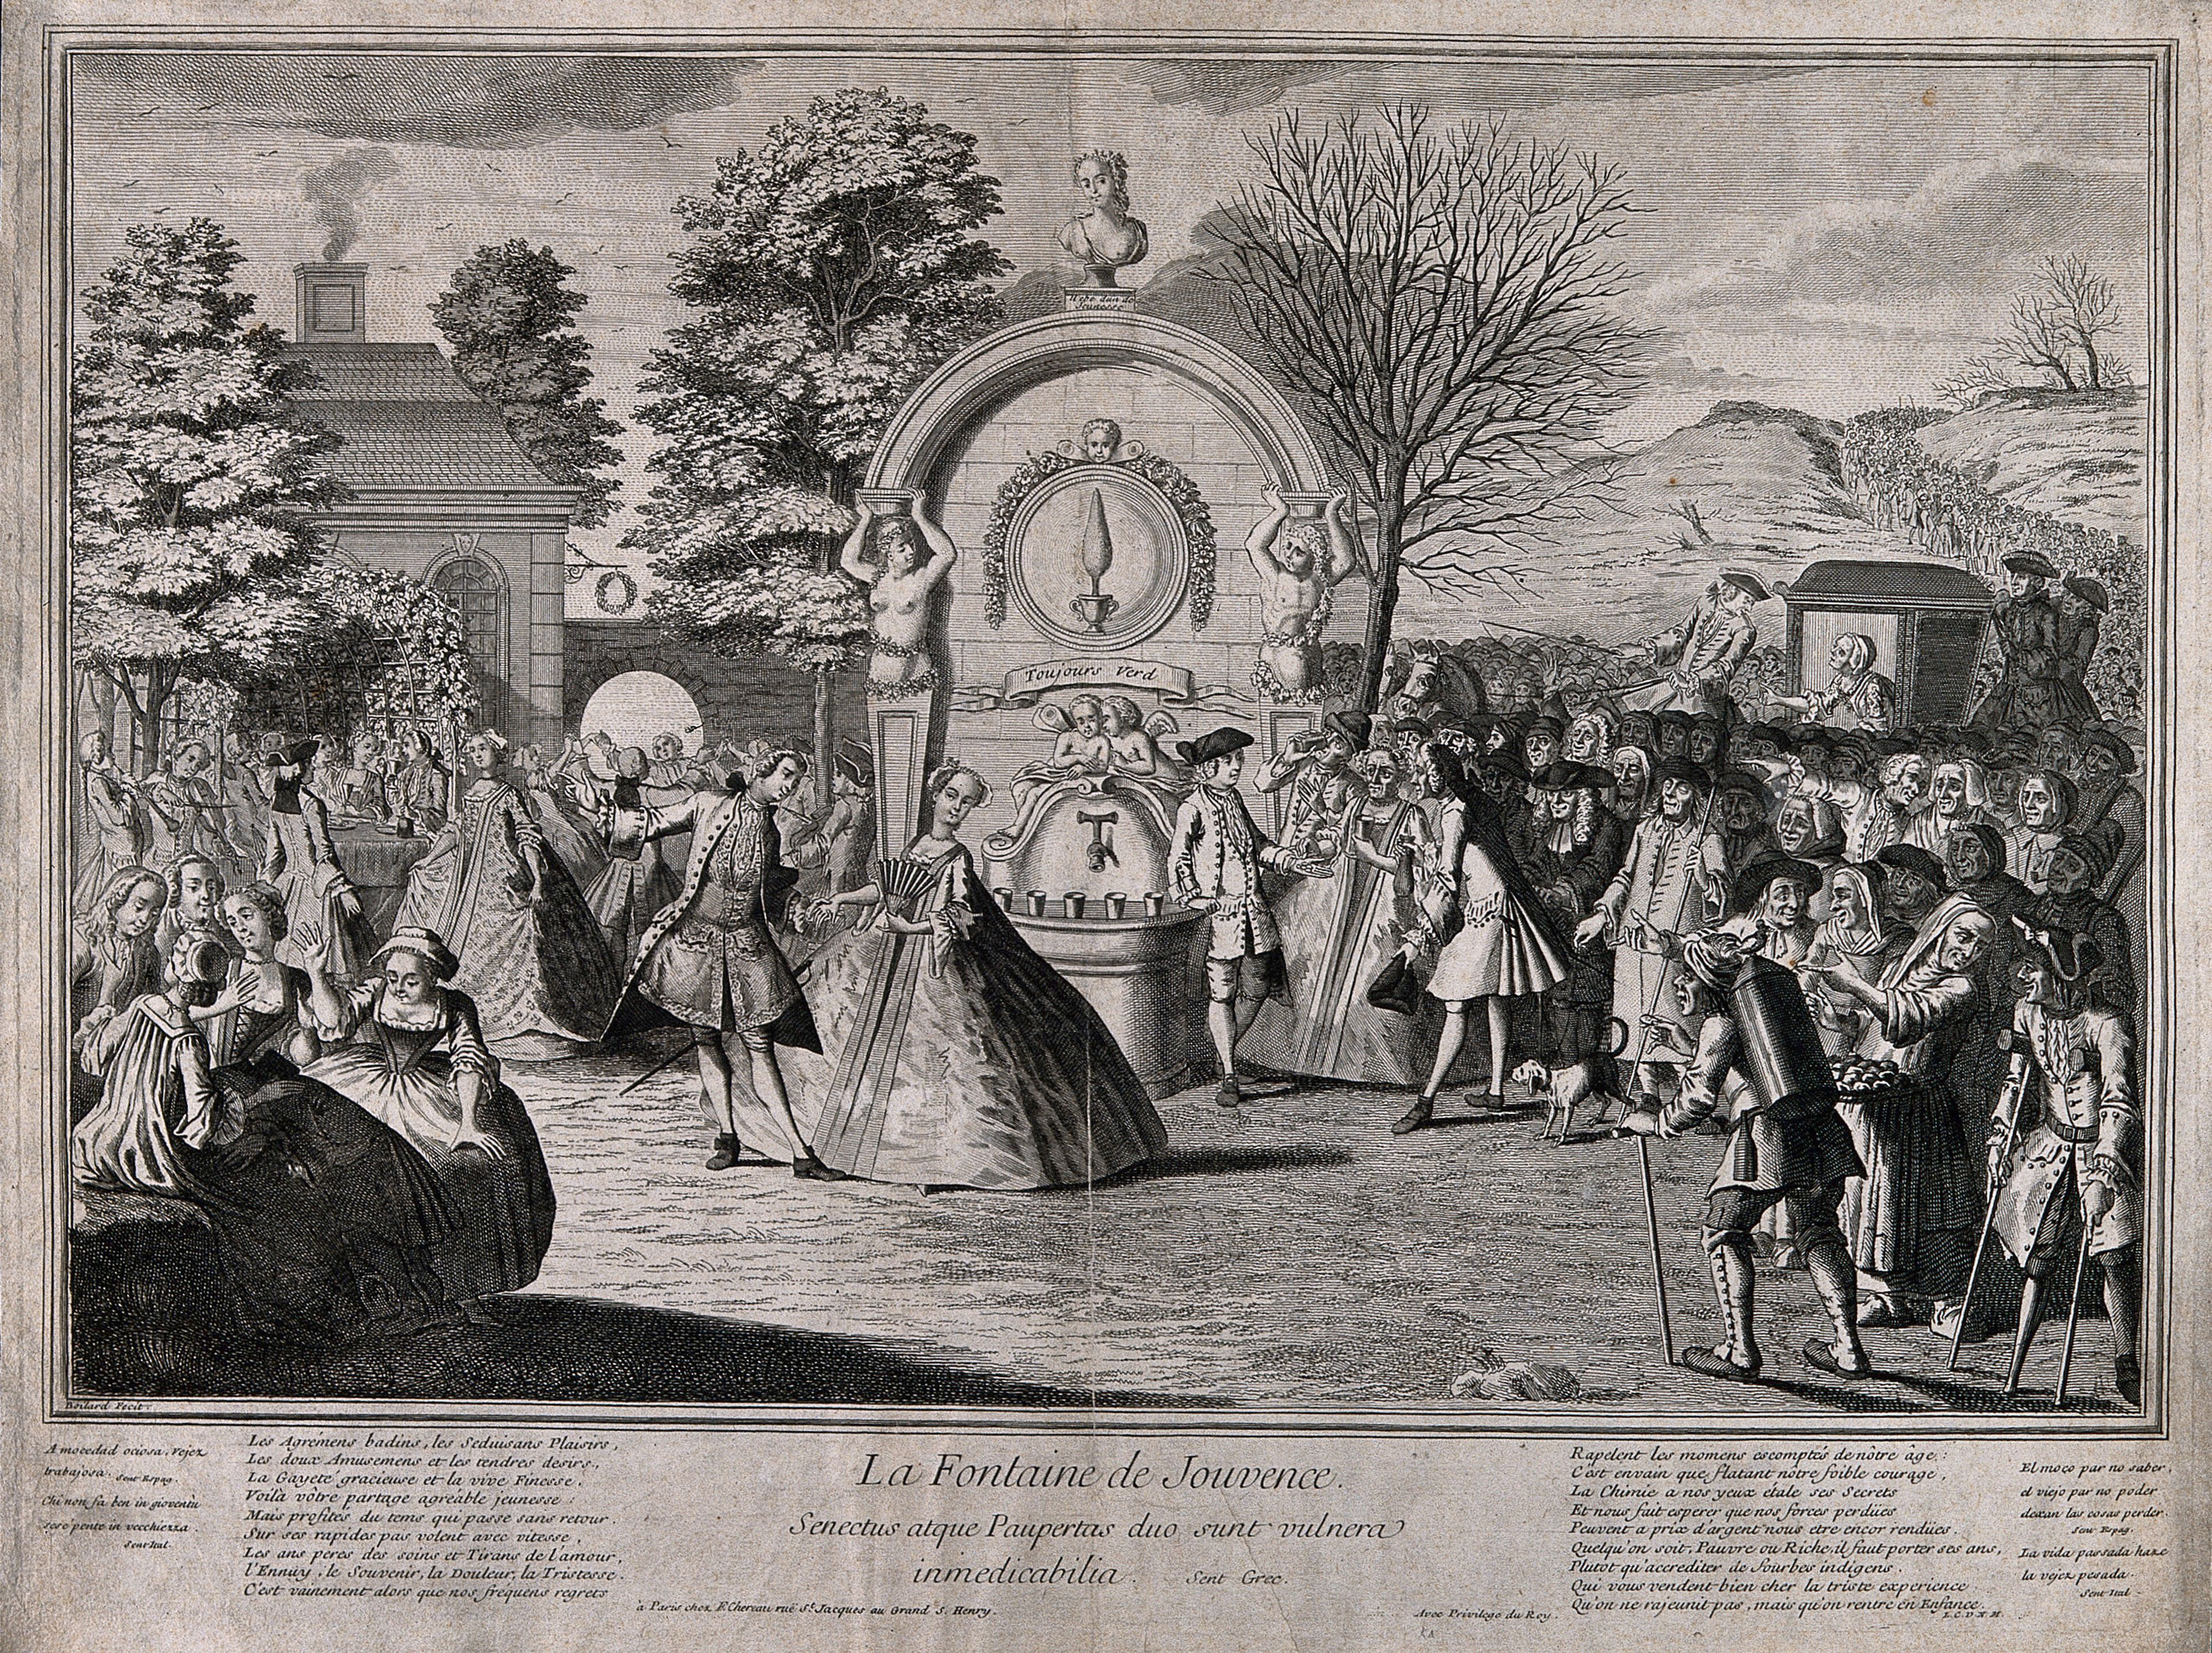 Crowds of old and infirm people arrive at the fountain of youth to drink the special water; to the left are a group of youthful people dancing and singing, rejuvenated by the spring. Engraving by Boilard, ca. 1720.